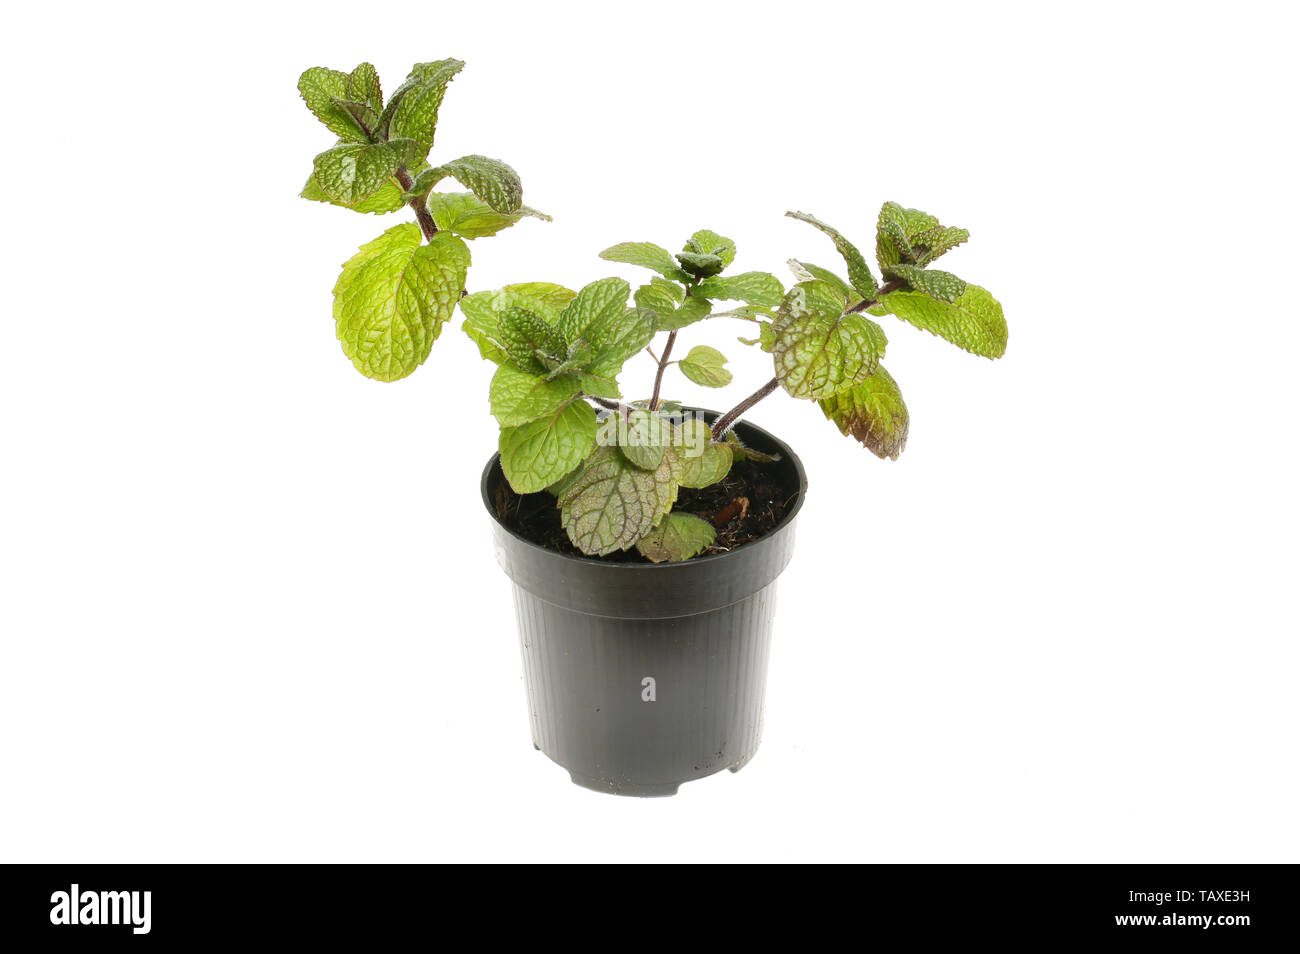 Applemint plant, Mentha suaveolens, in a plastic pot isolated against white Stock Photo